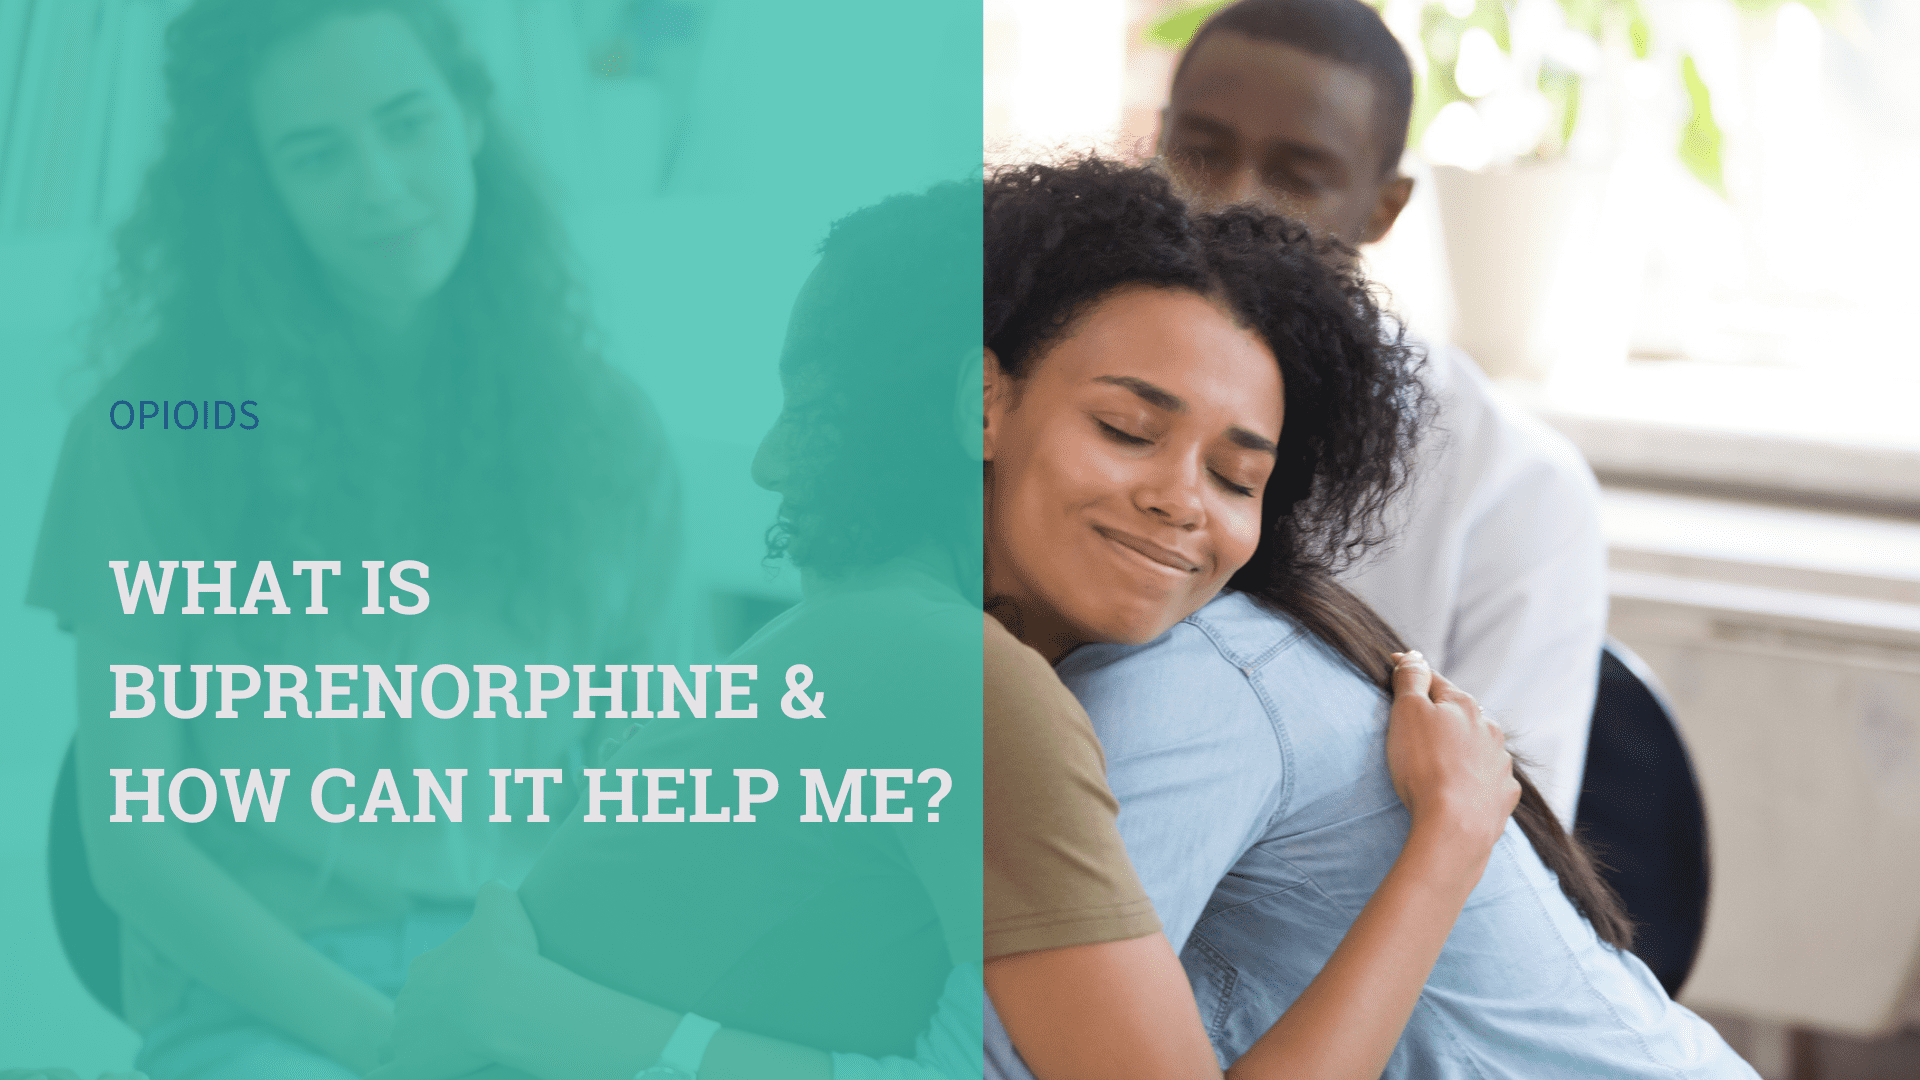 What Is Buprenorphine & How Can it Help Me?